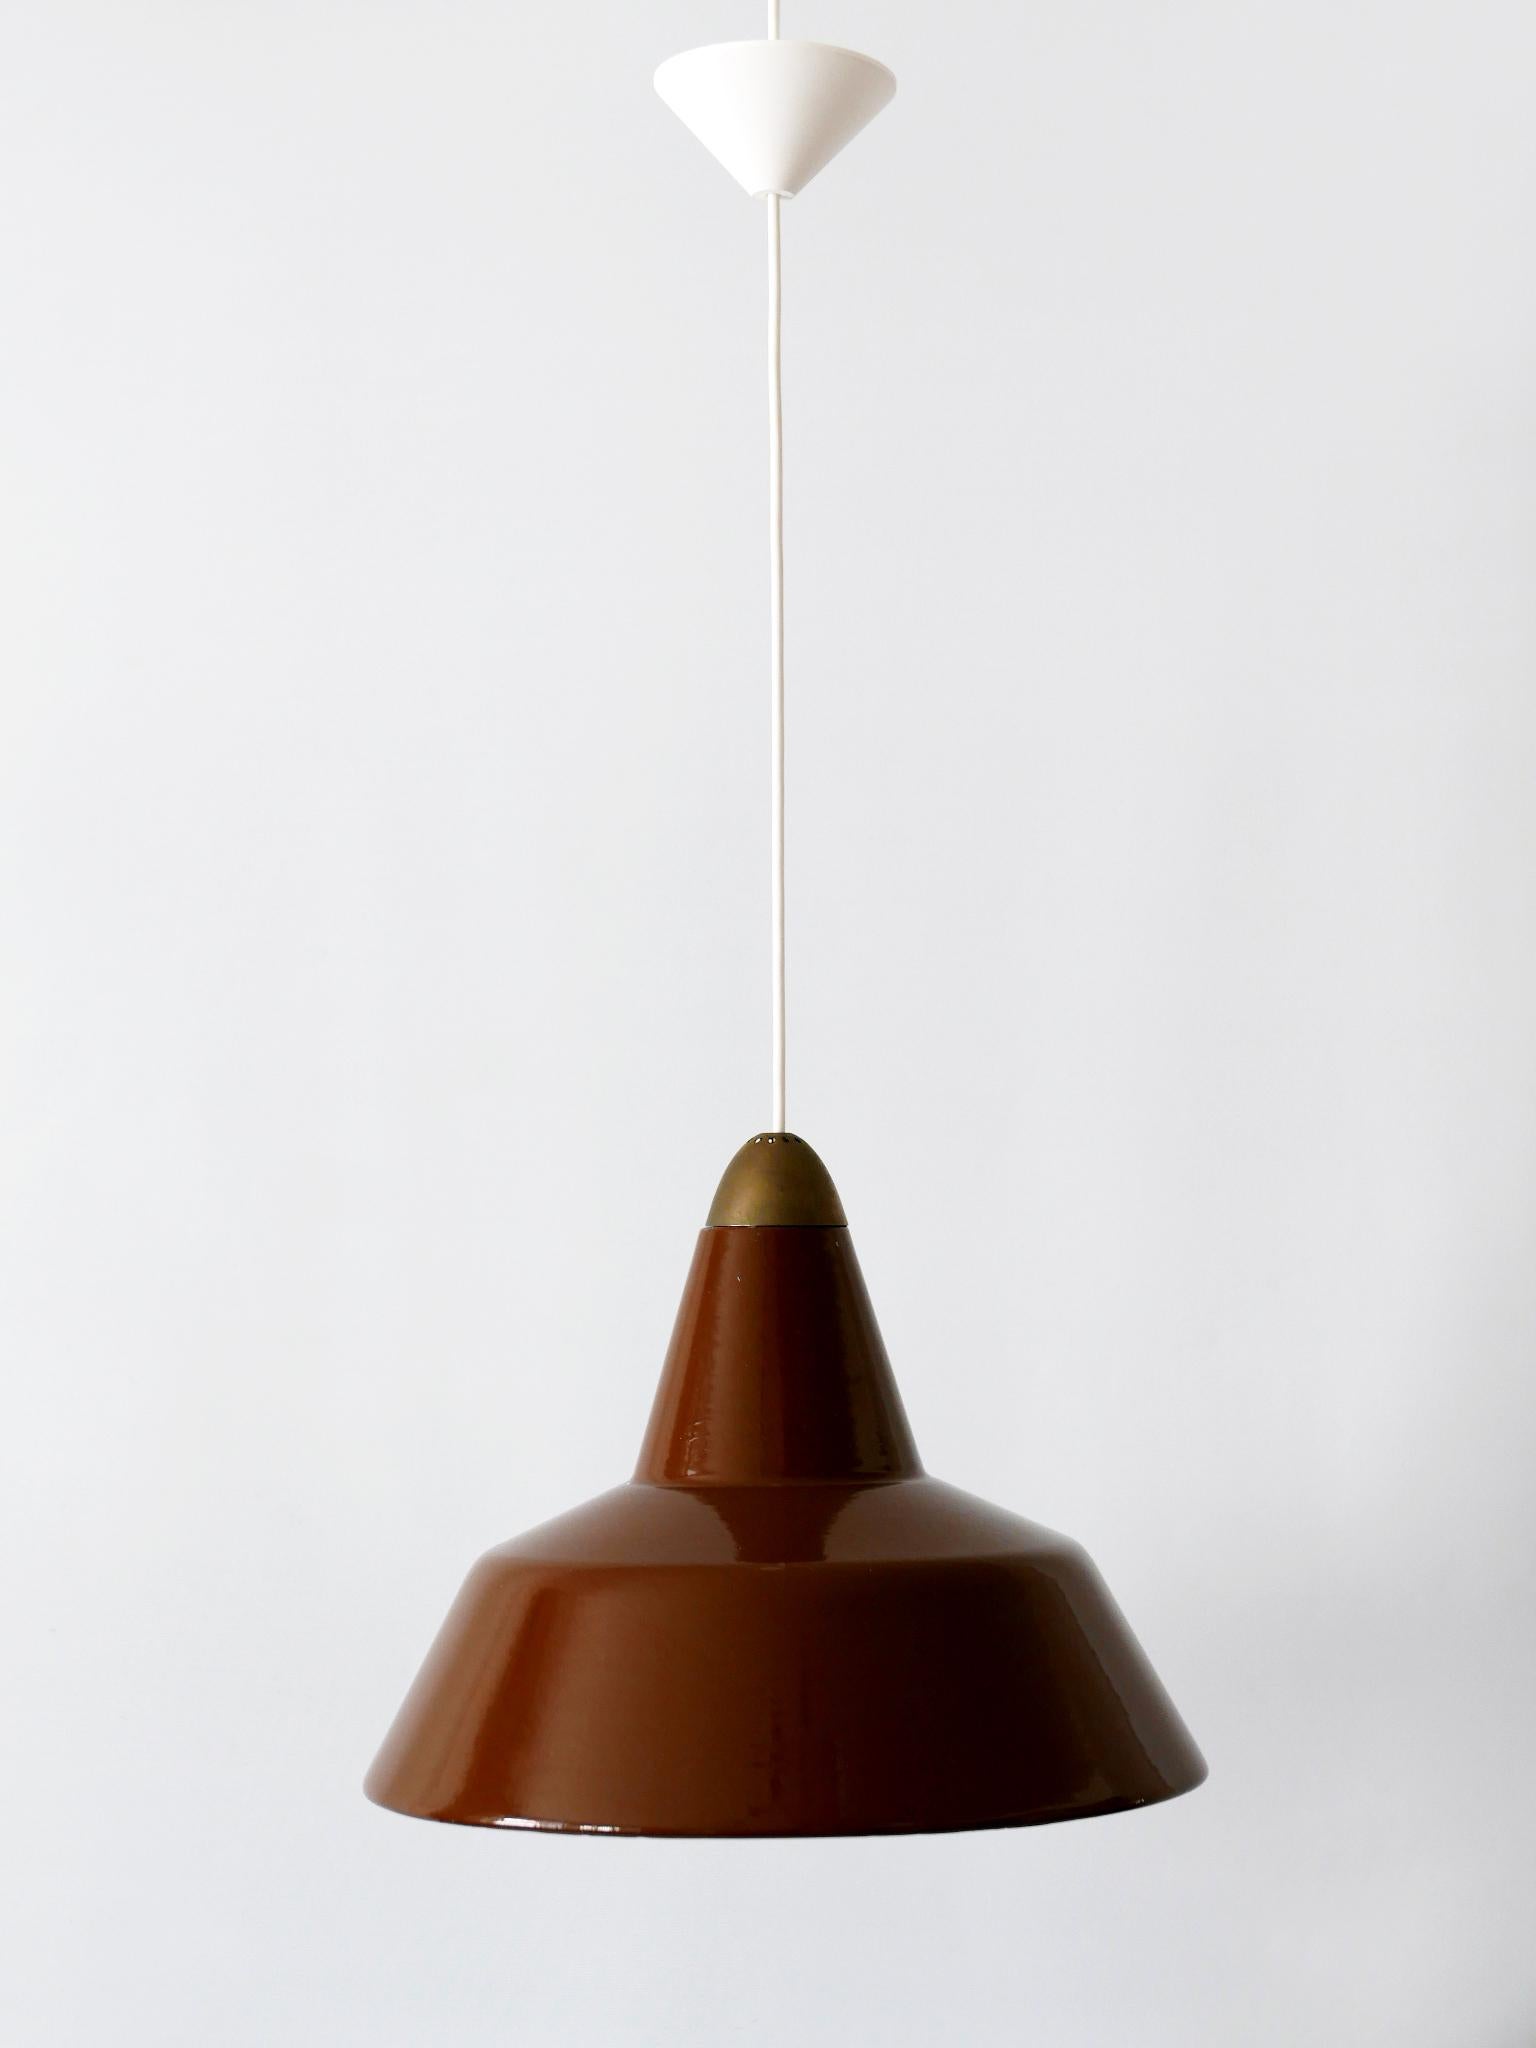 A real classical from 1960s. Enameled Mid-Century Modern pendant lamp or hanging light. Designed and manufactured by Louis Poulsen, Denmark, 1960s.

Executed in dark brown enameled metal and brass, it comes with 1 x E27 / 26 Edison screw fit